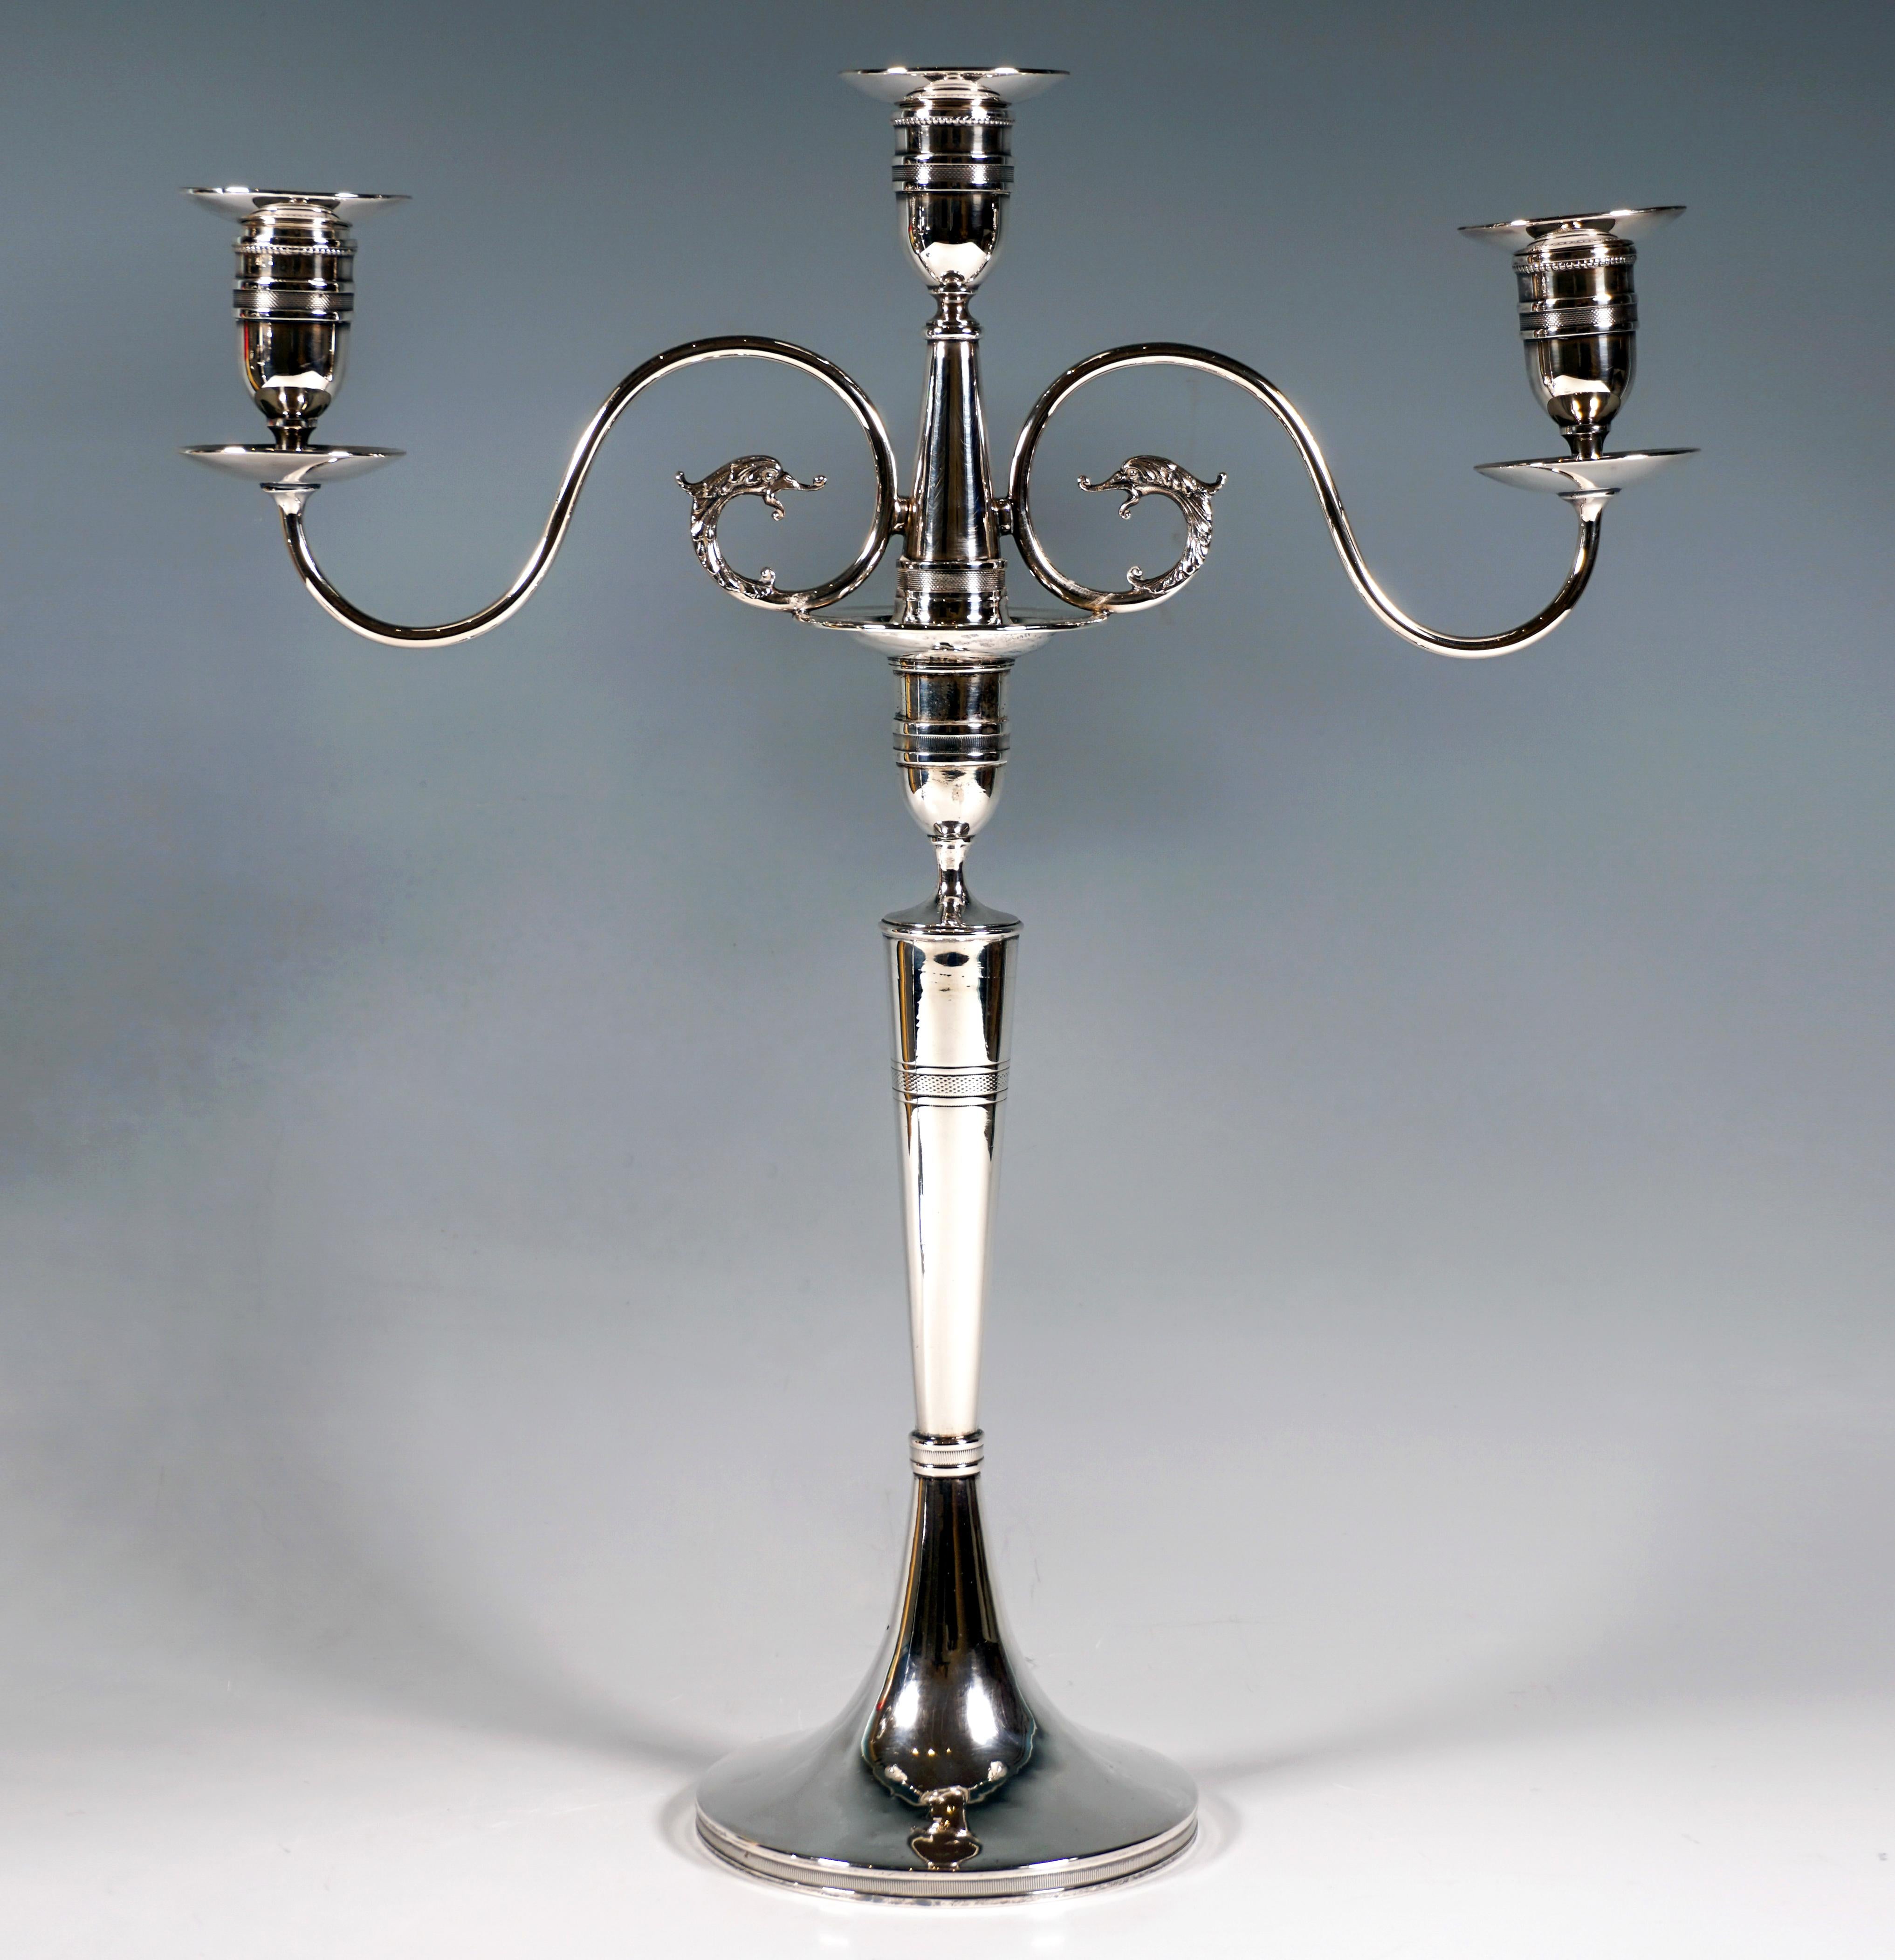 Hand-Crafted Pair Of Antique 3-Flame Empire Silver Candle Holders, by Anton Köll, Vienna 1807